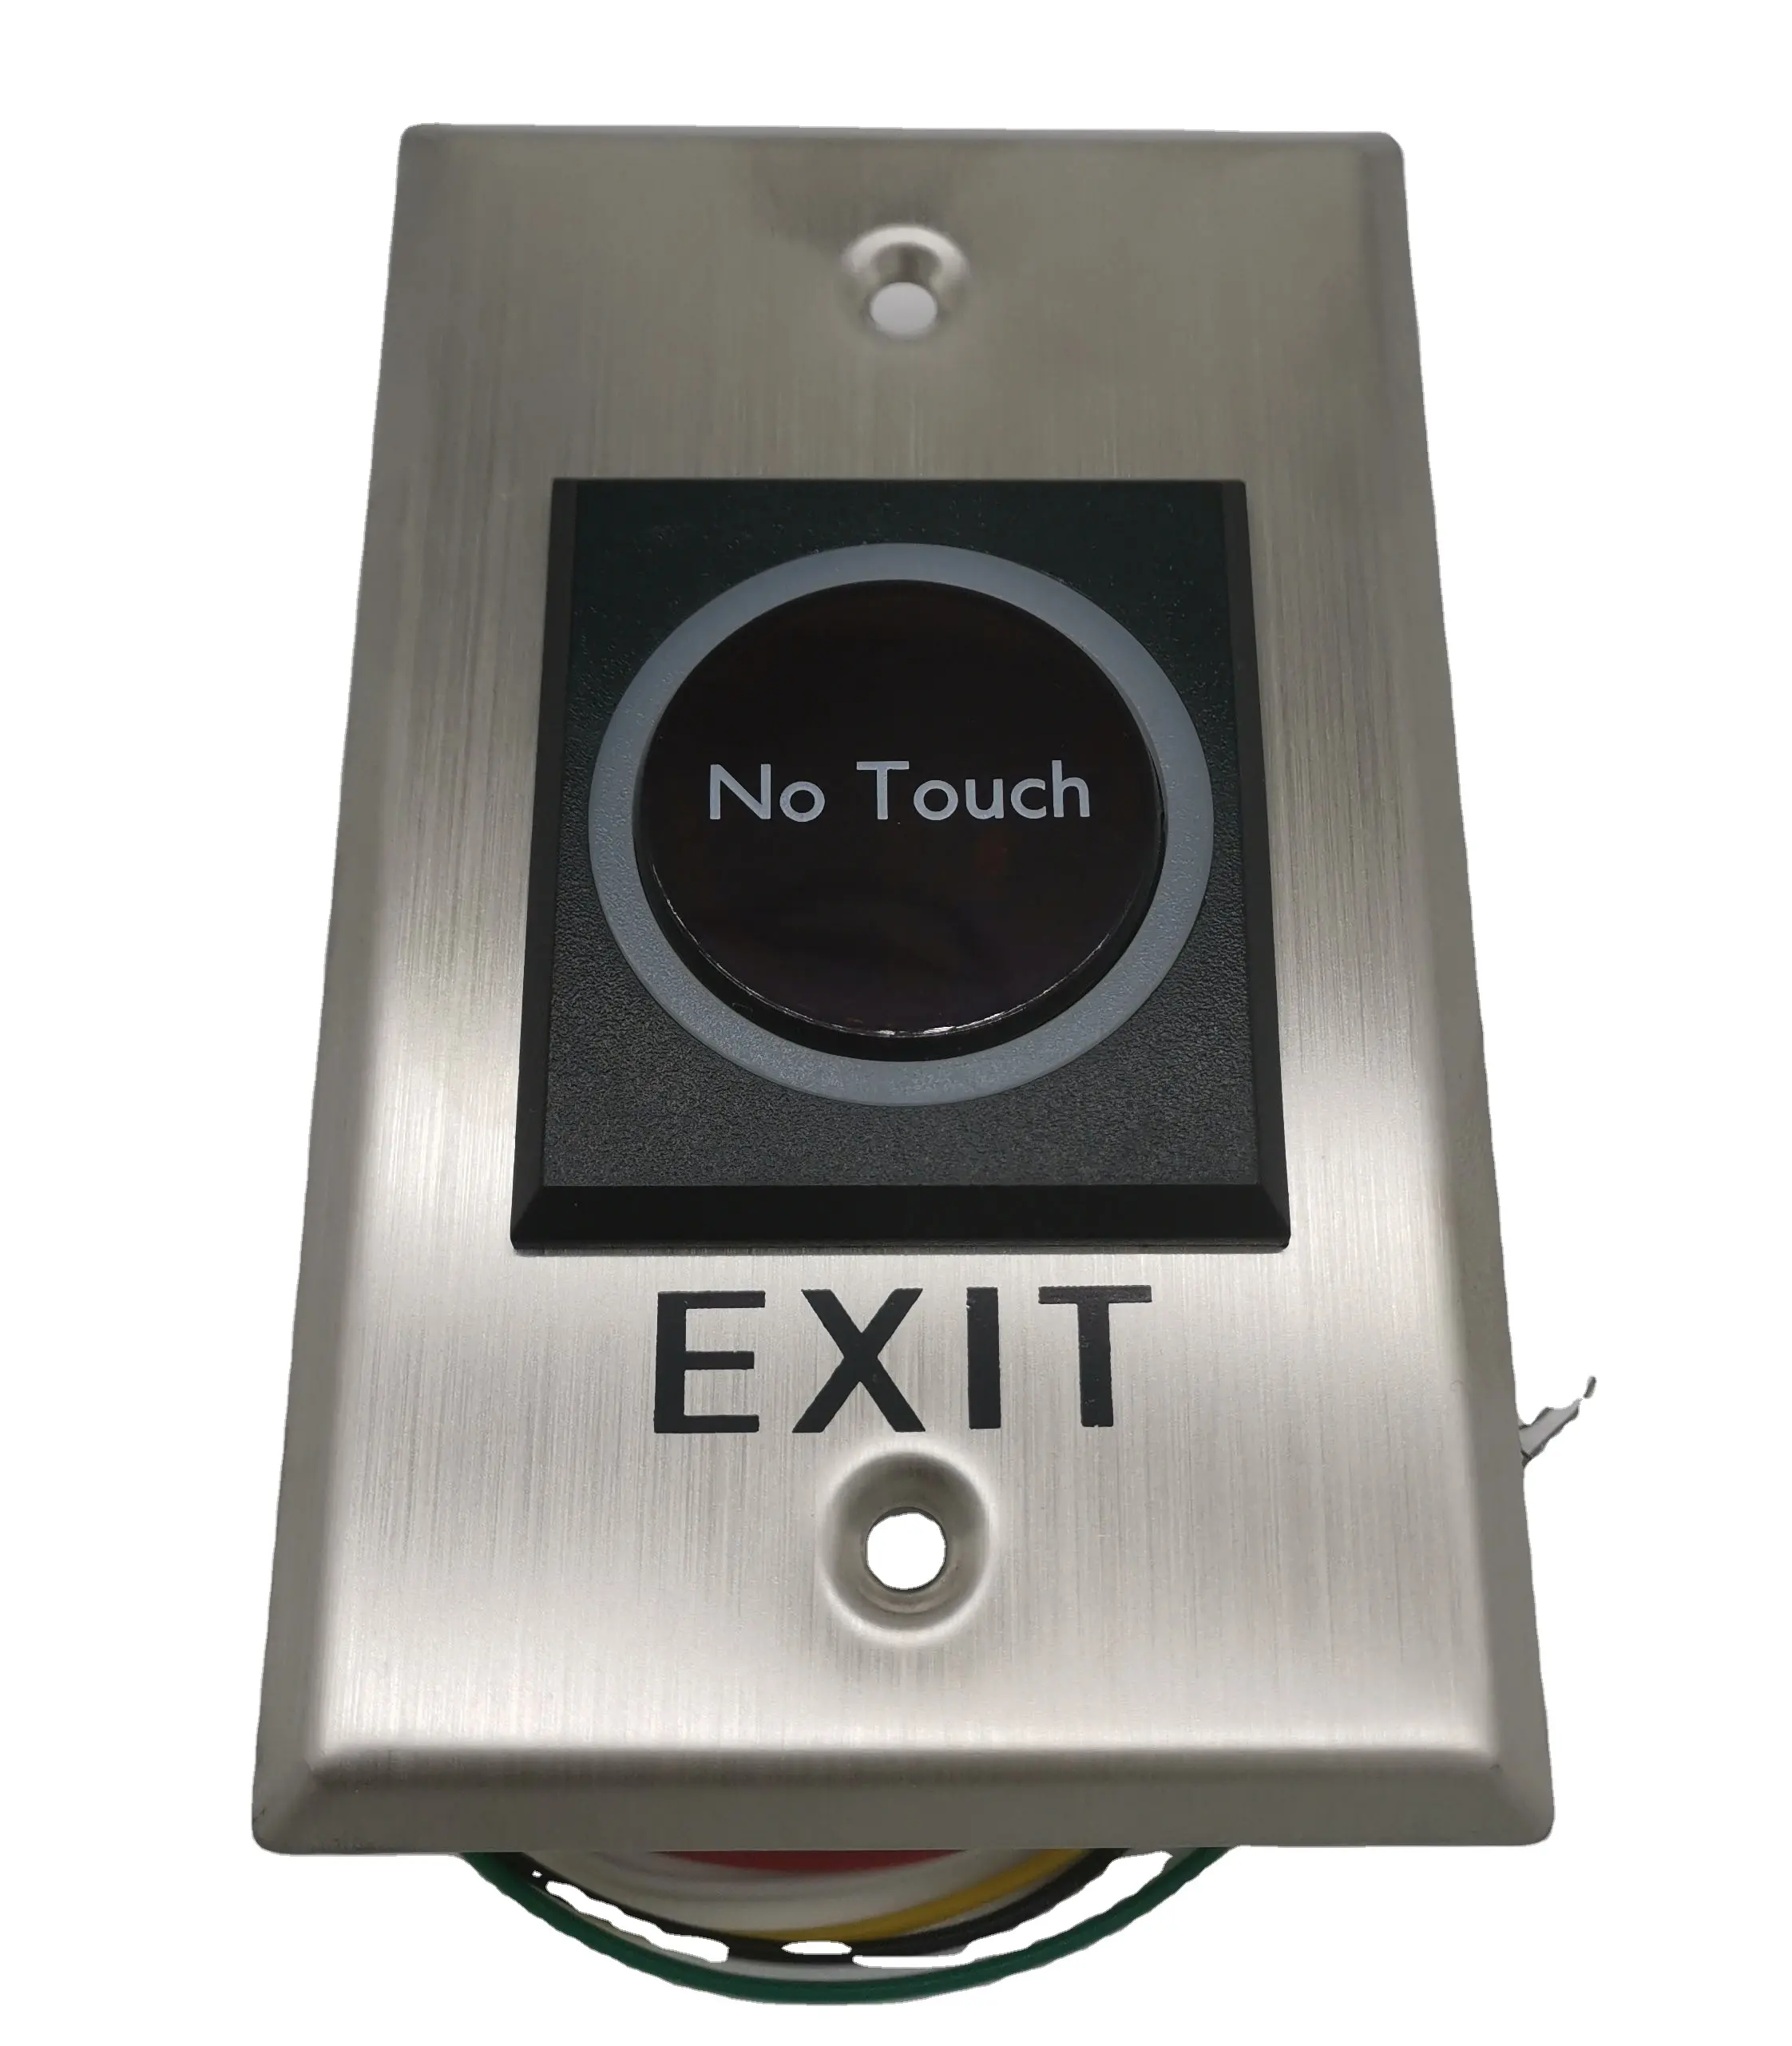 Infrared sensor no touch exit button RFID access control exit door release